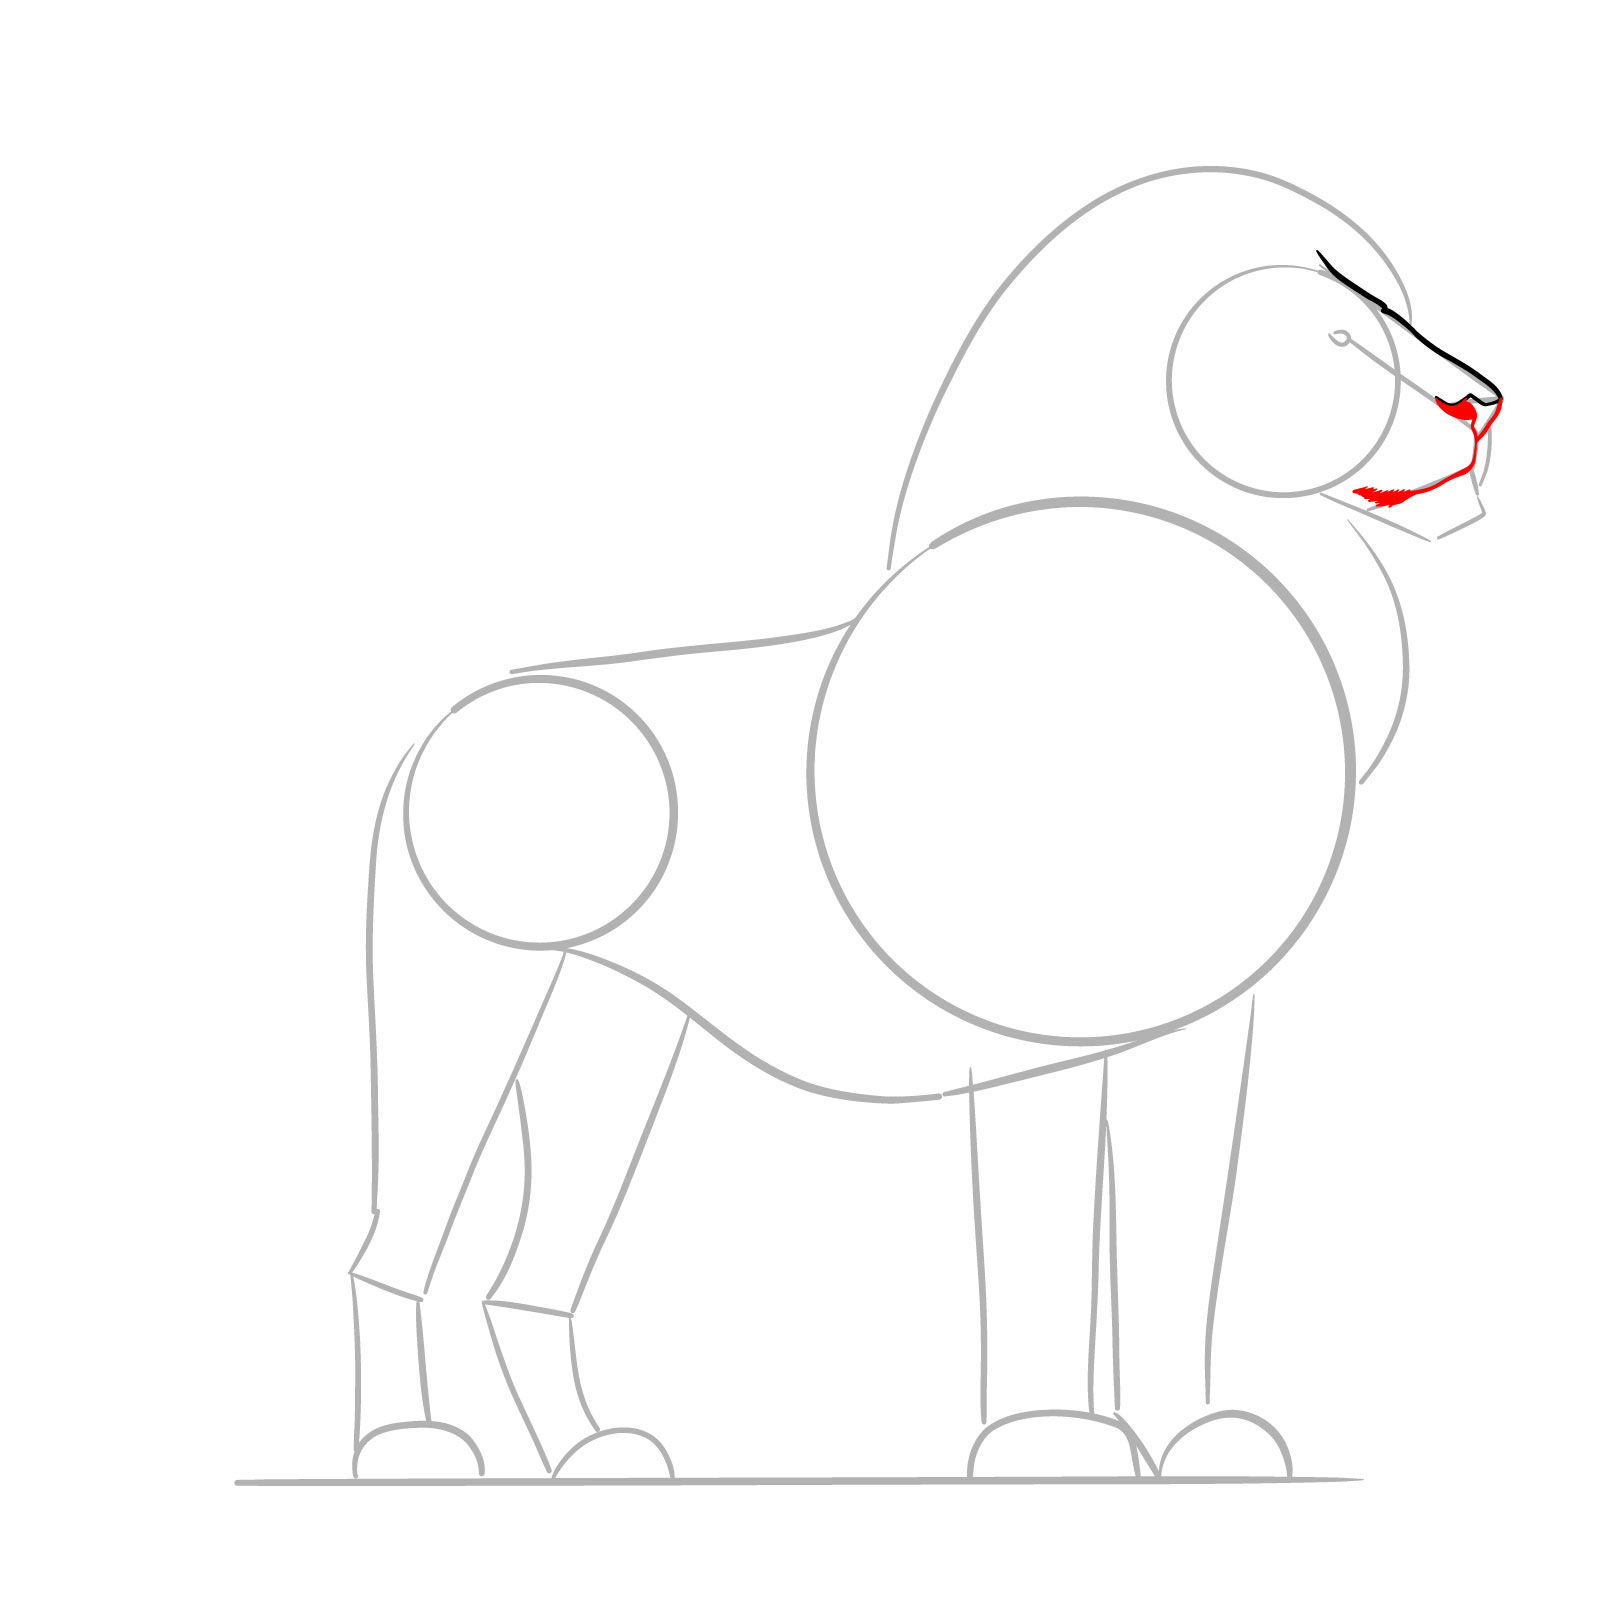 Drawing the mouth and chin details in a standing lion tutorial - step 05